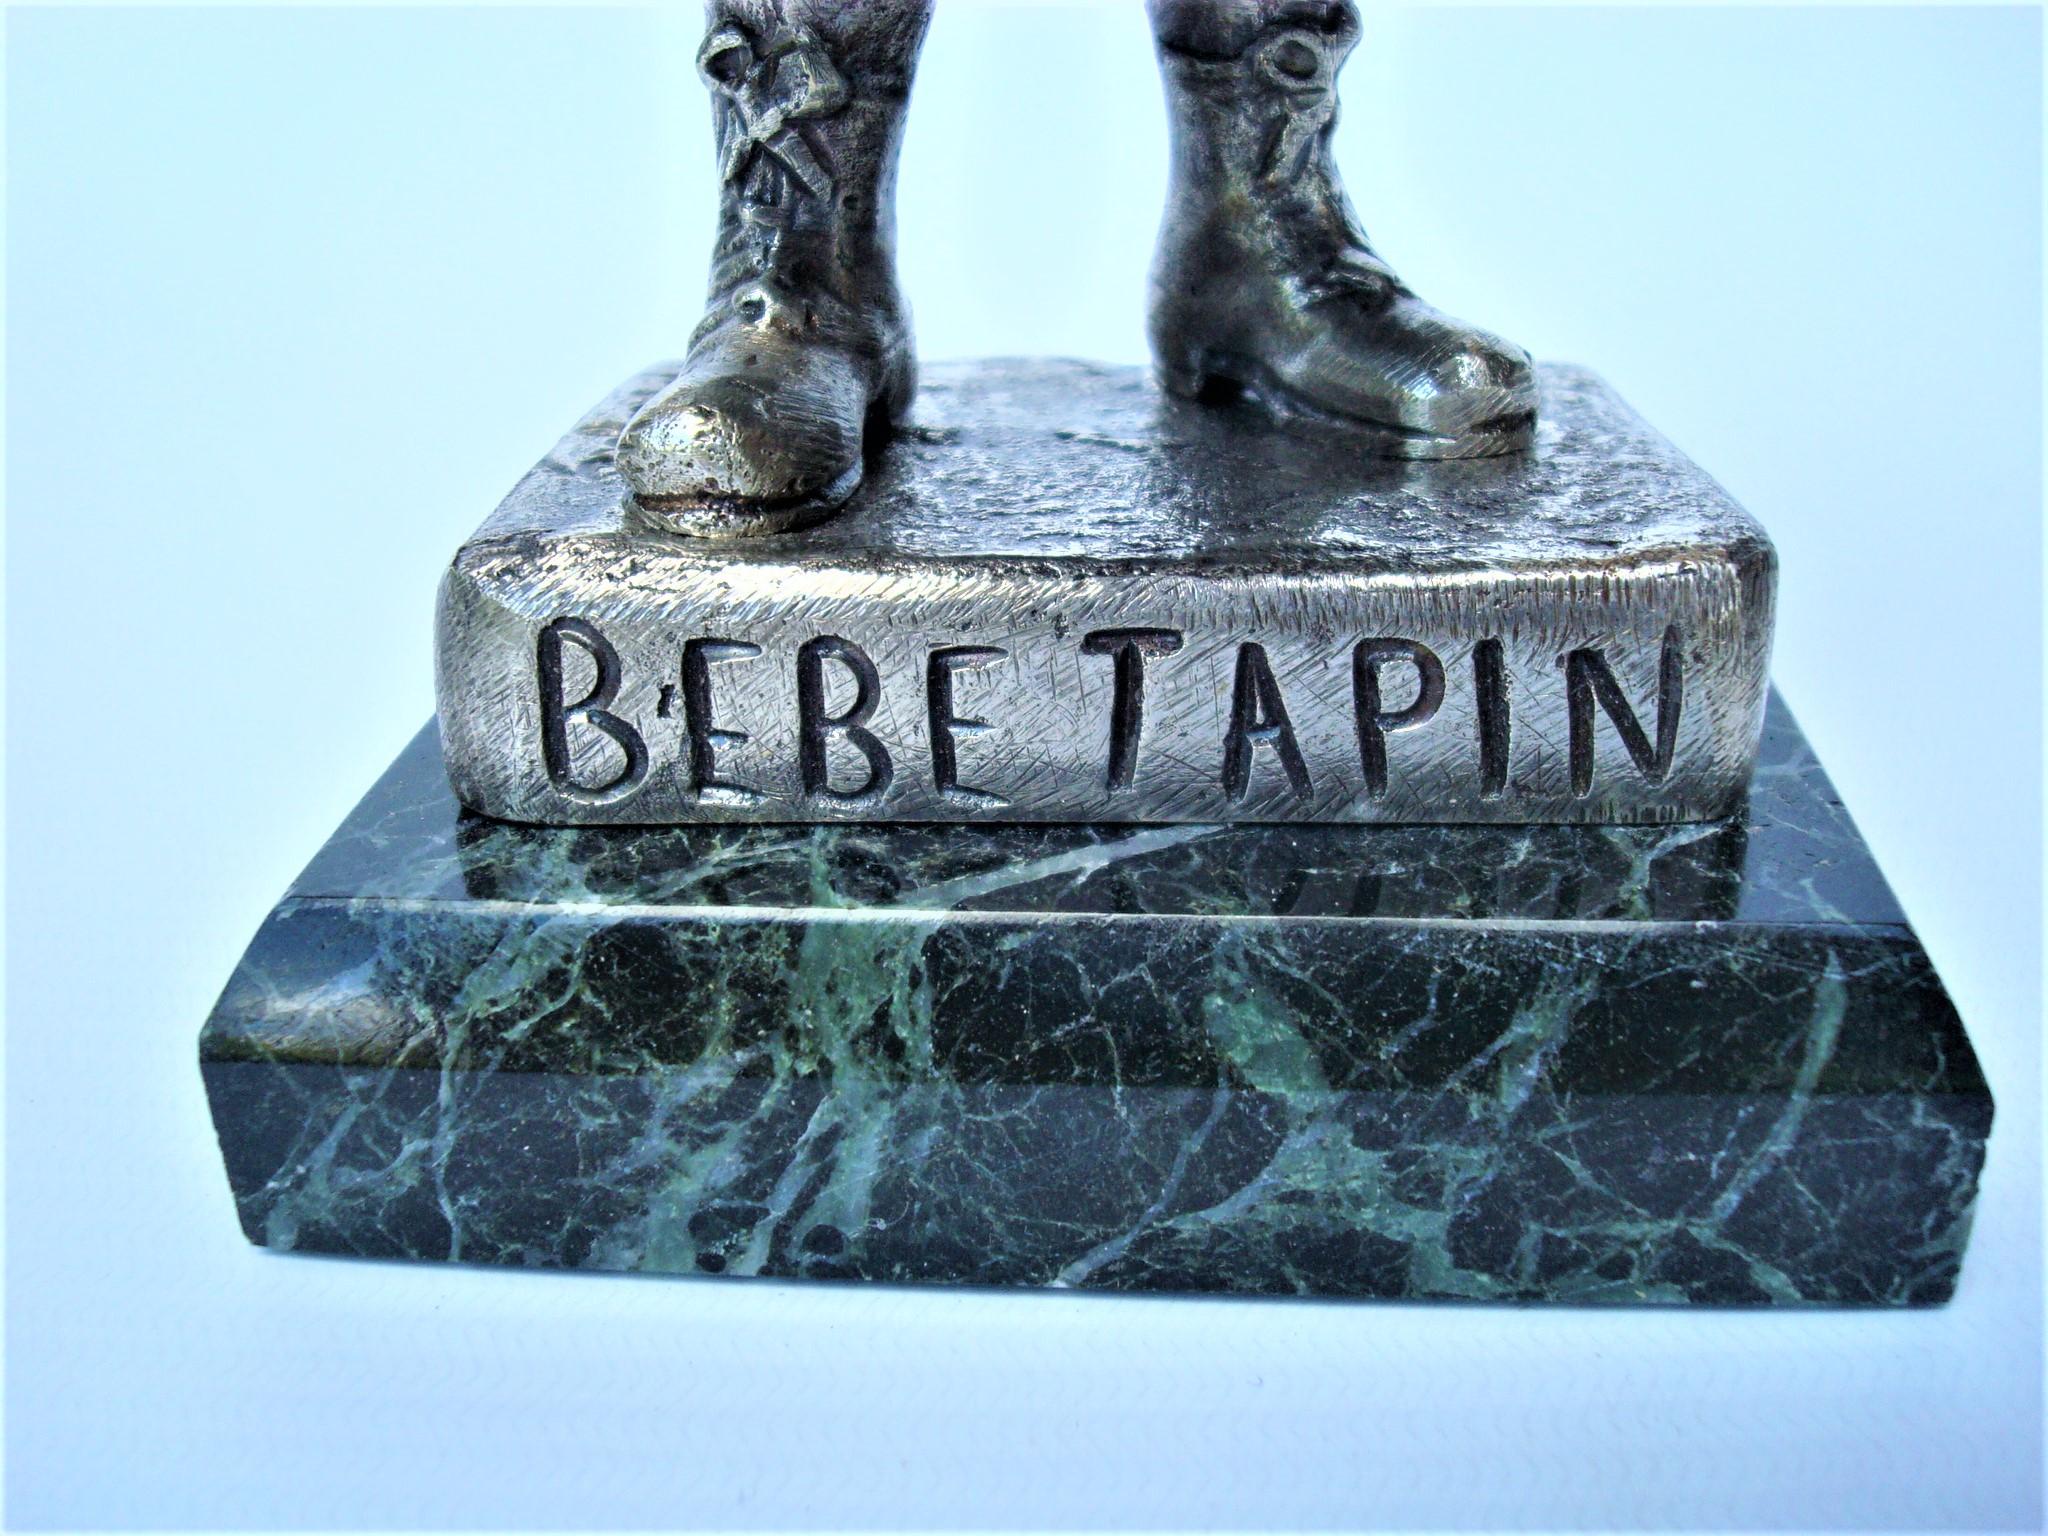 Henri Fugere, bronze figure, ' Bebe Tapin ' signed in the bronze.
French Boy playing his drum. Henry Fugere, a well listed artist. Mr. Fugere was born in 1872 and exhibited in Paris at the salon for several years. Many fine examples of his work are